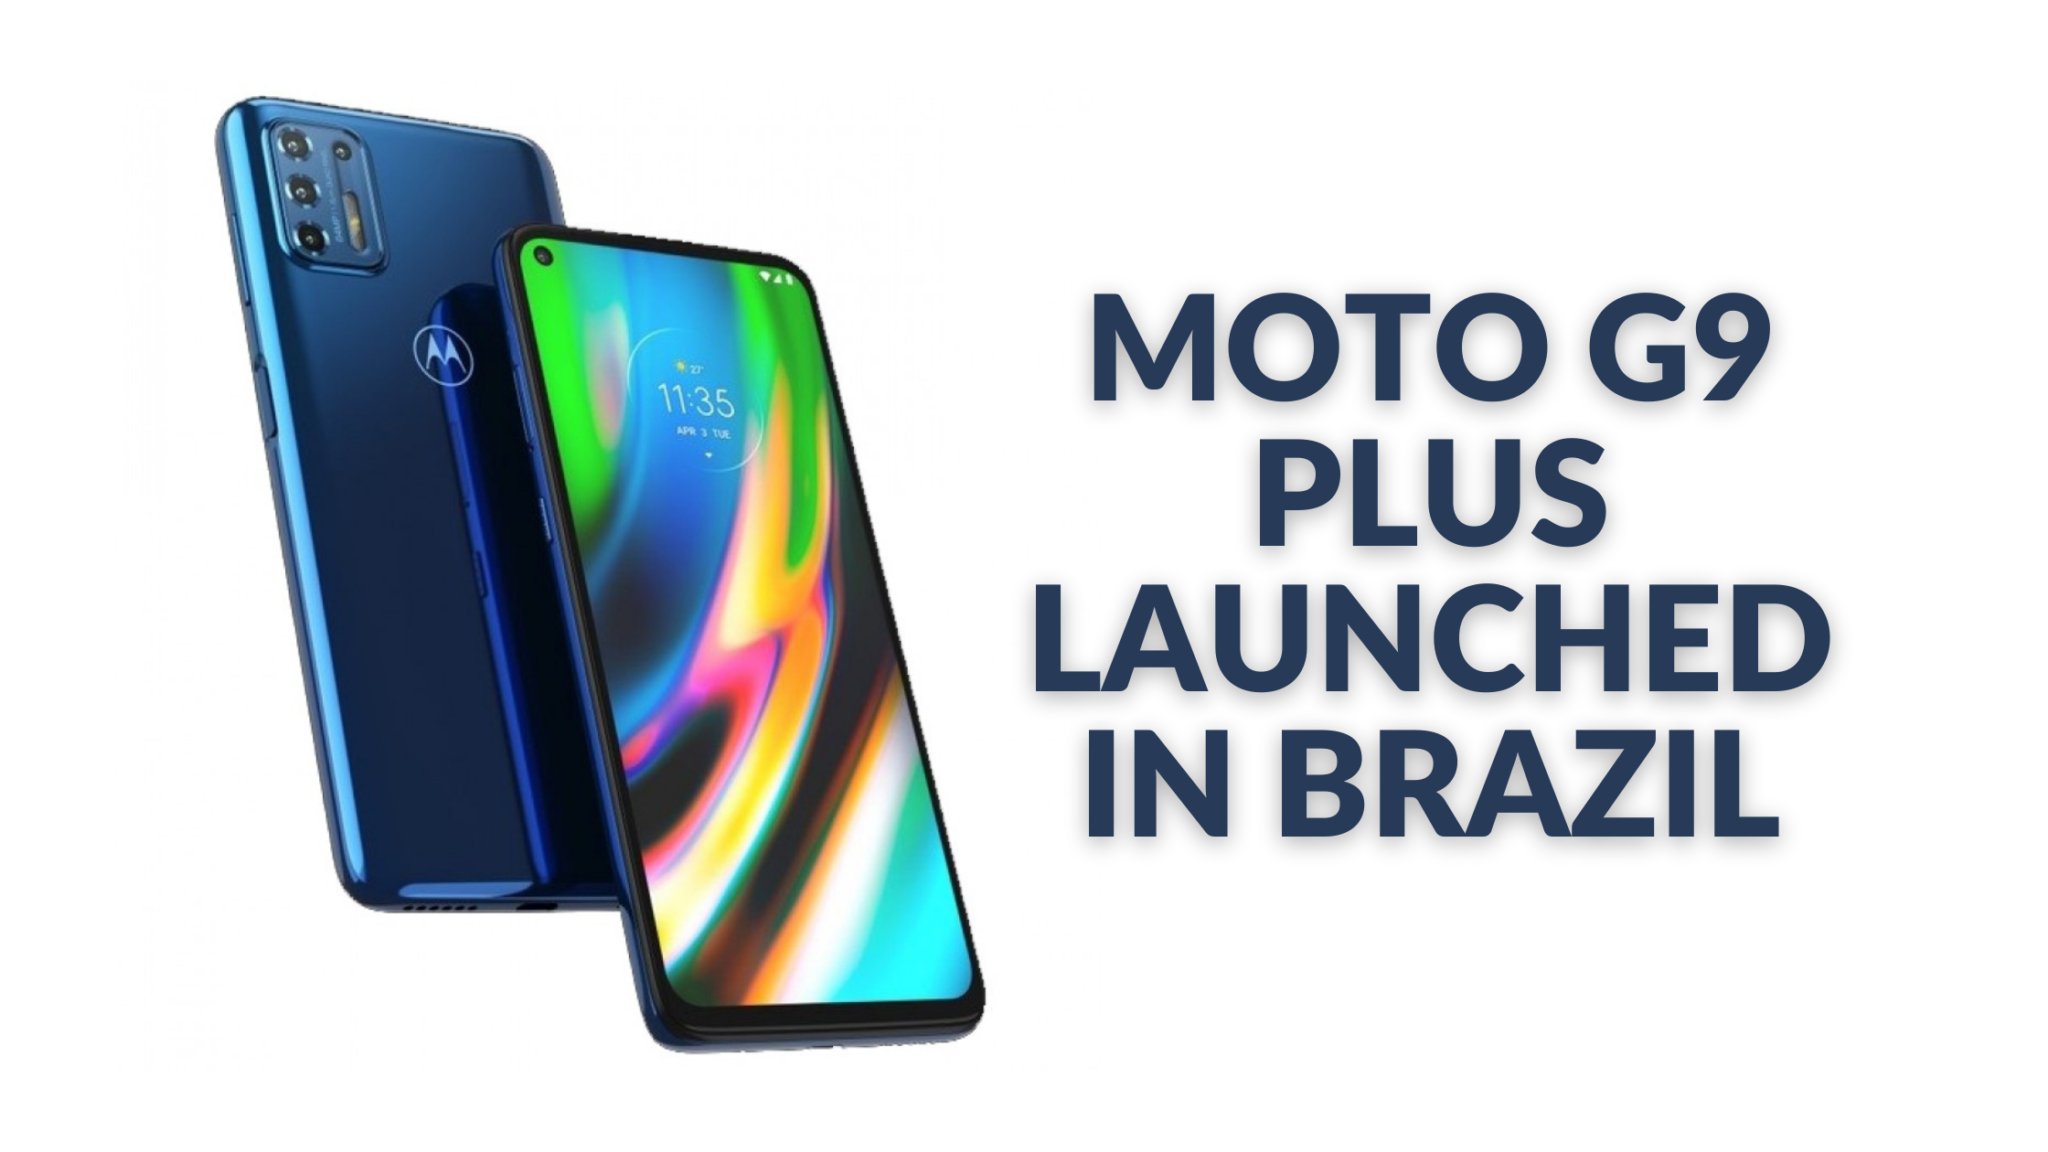 Moto G9 Plus launched in Brazil with Snapdragon 730G